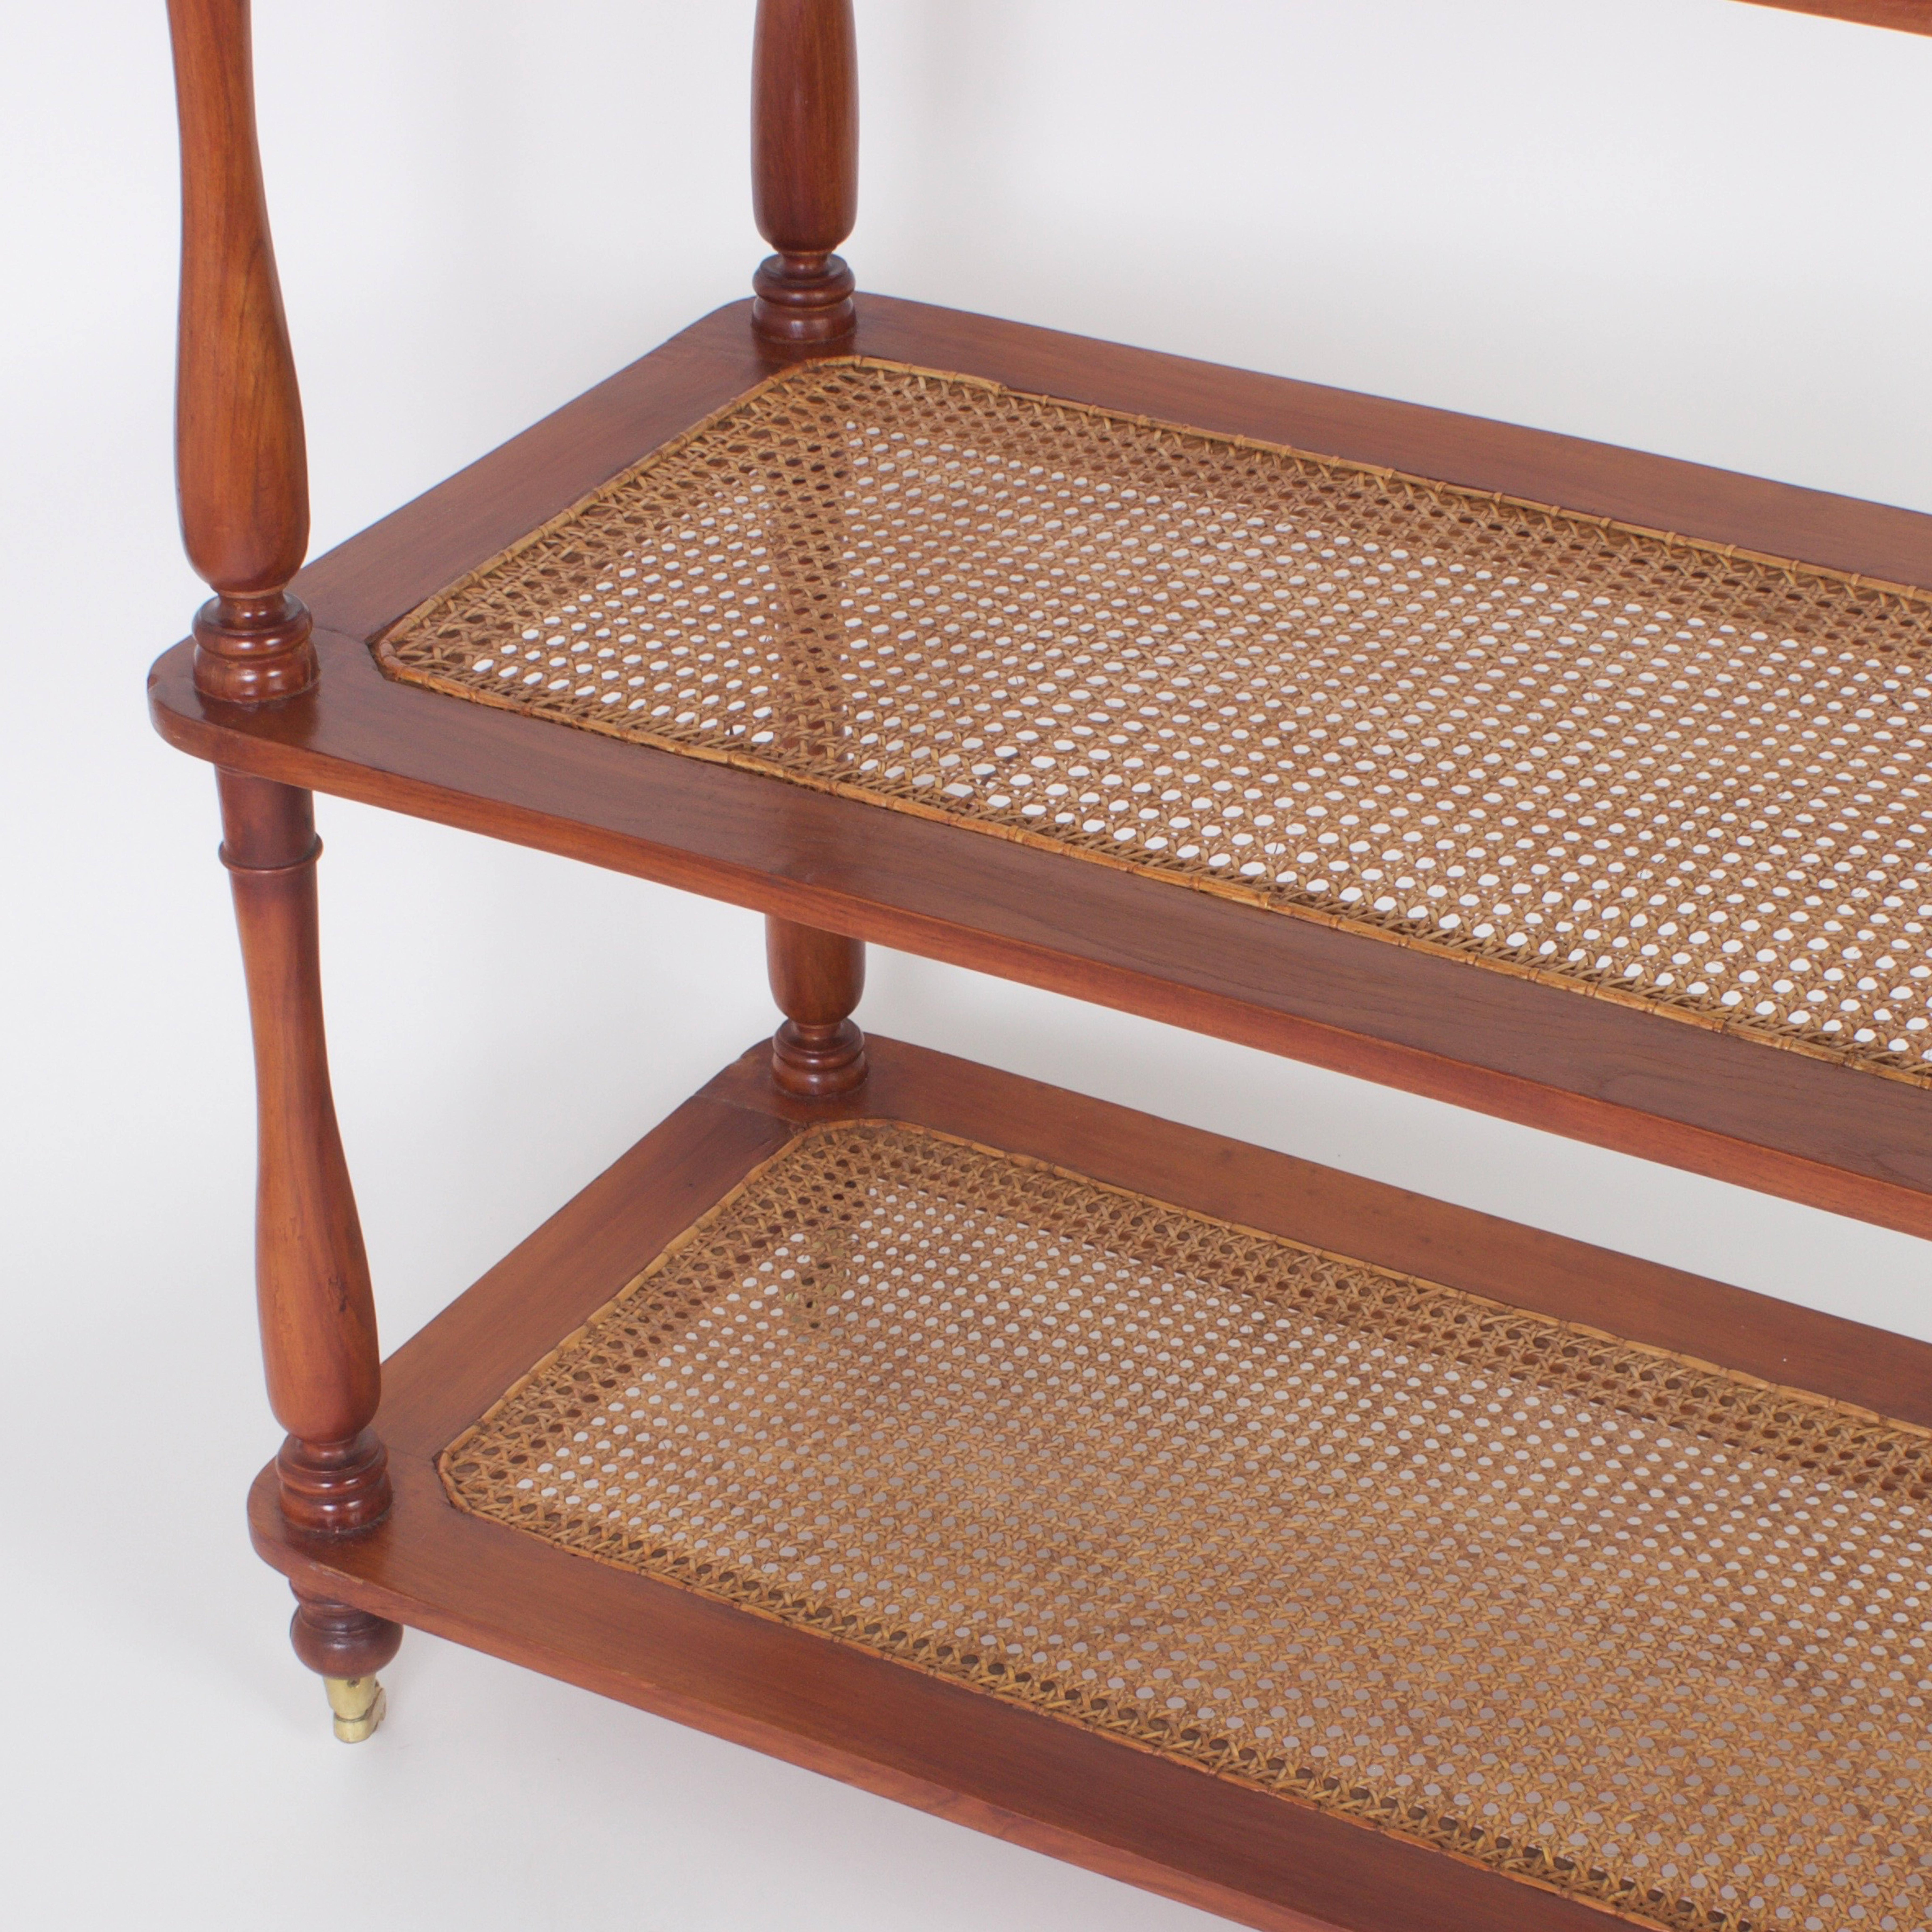 British Colonial Three-Tiered Antique Cane Shelf Etagere or Set of Shelves in Mahogany